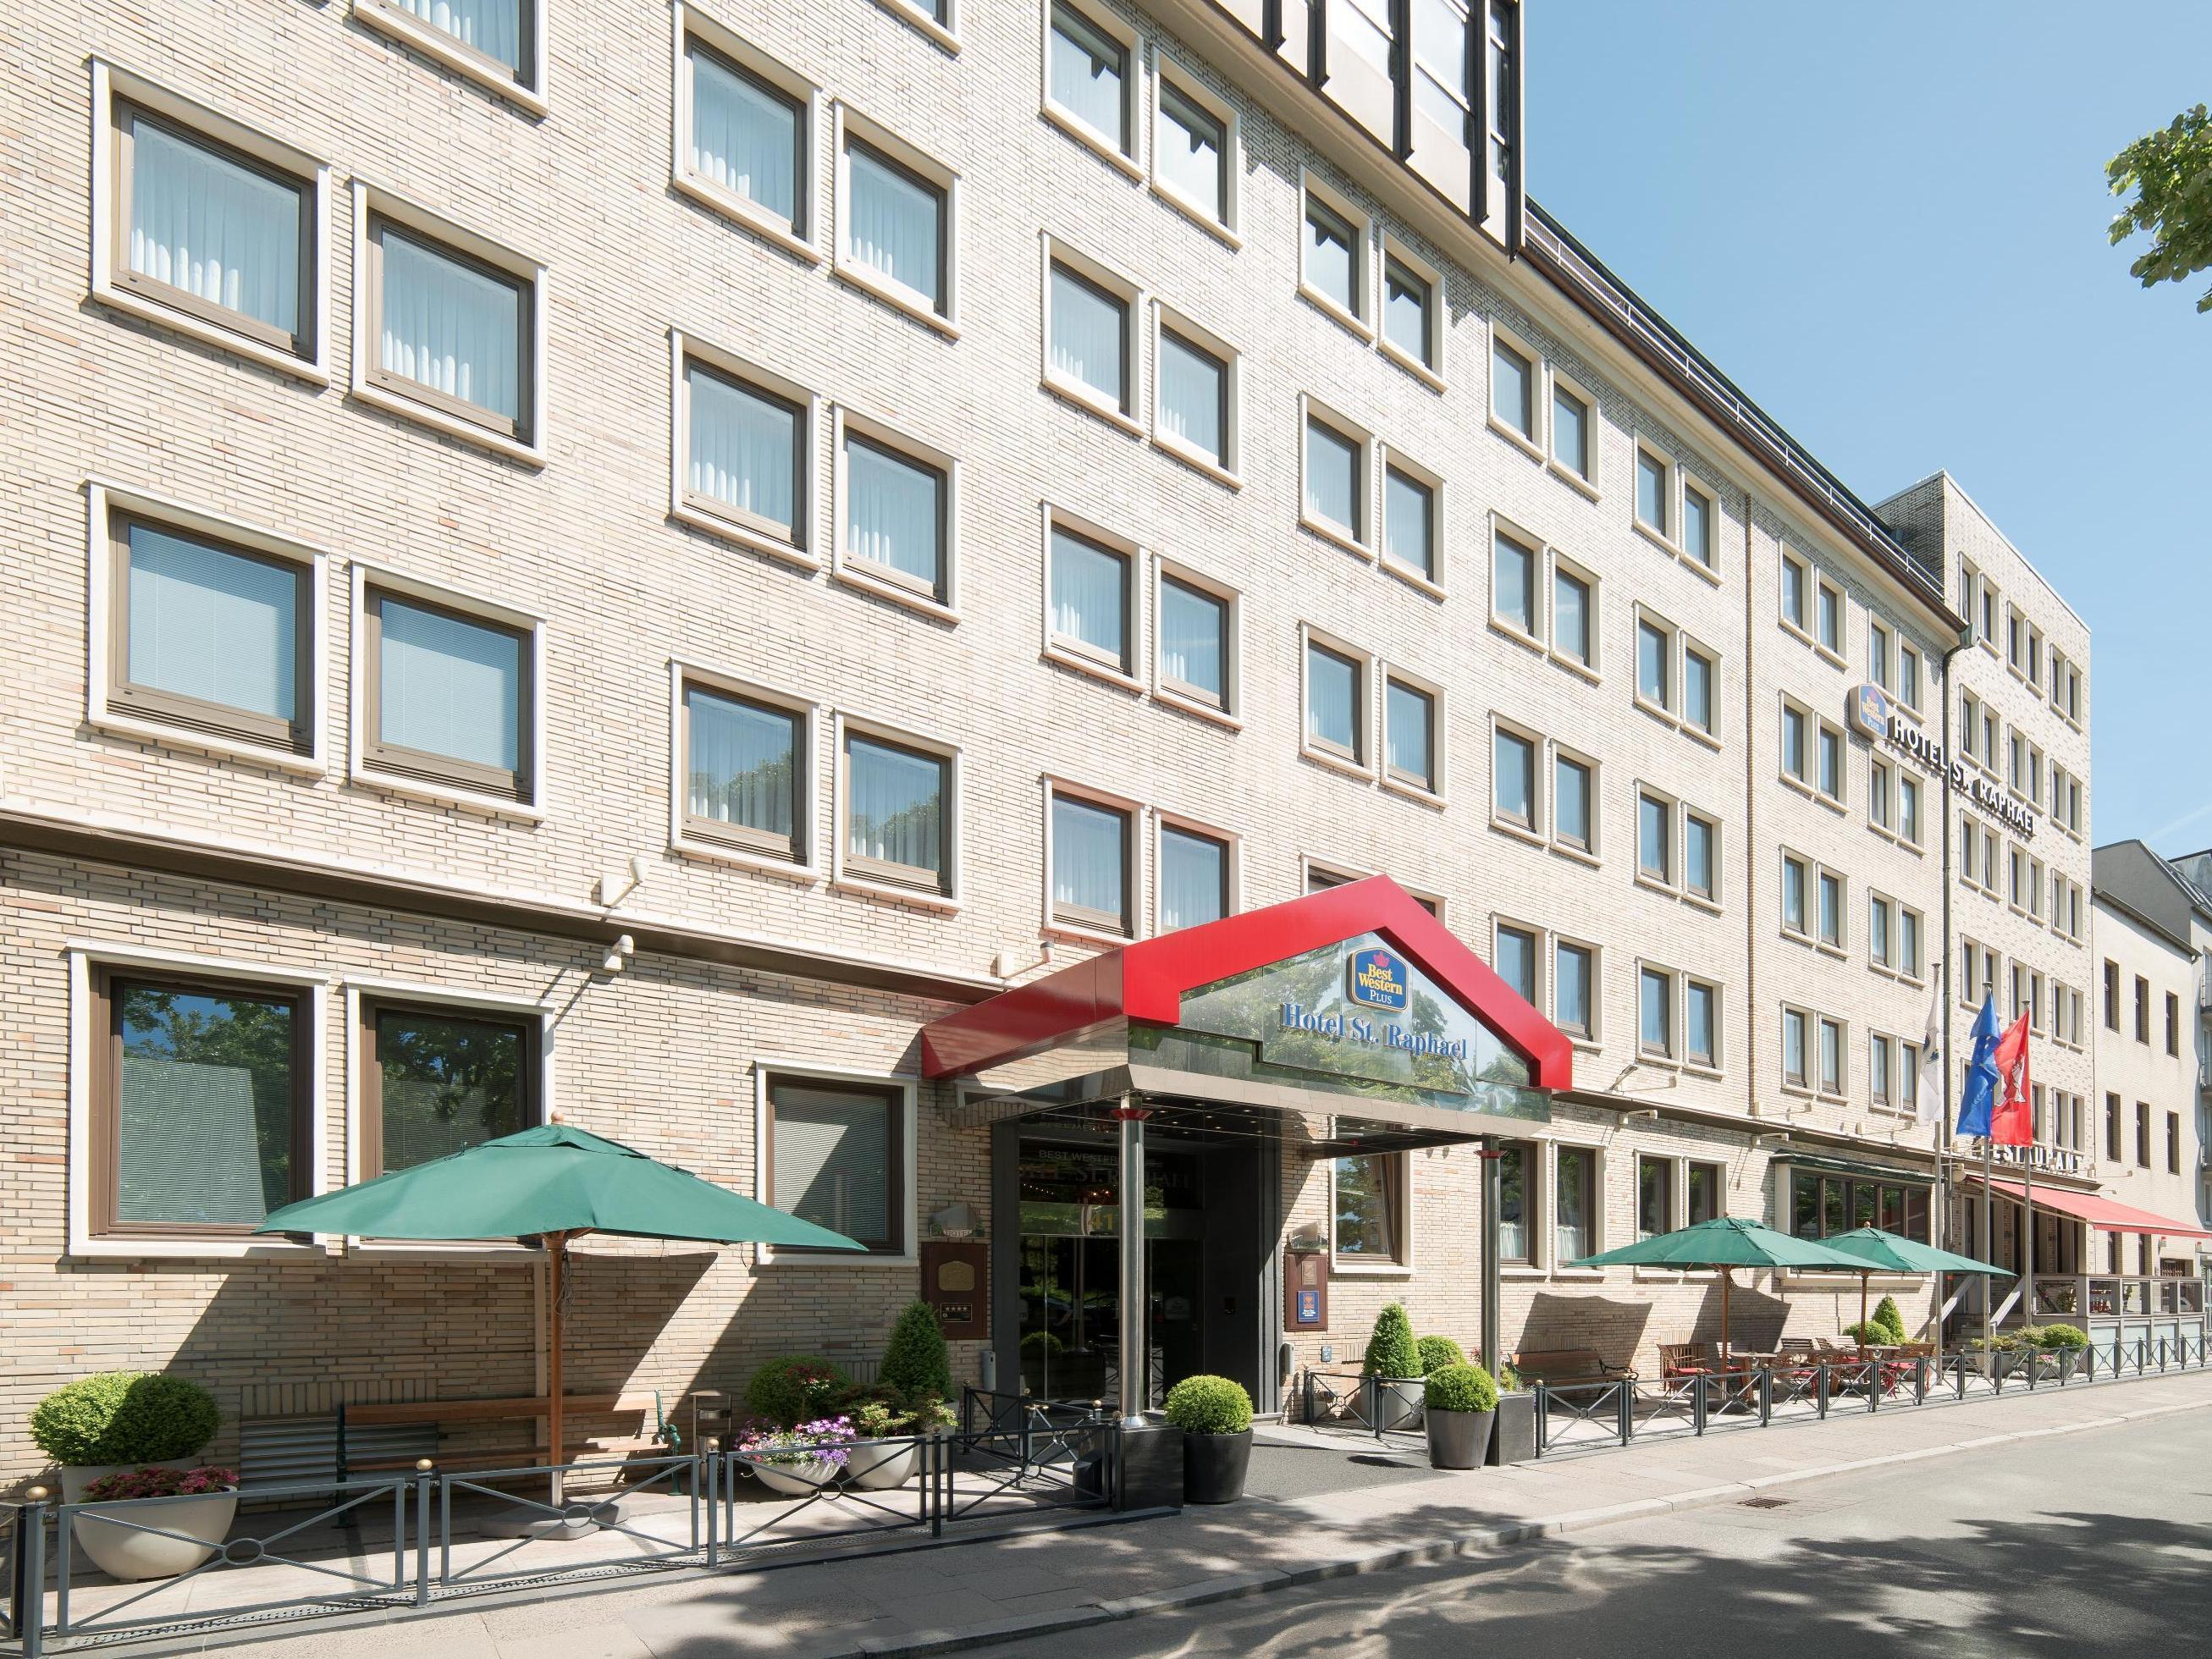 Best Western Plus Hotel St. Raphael Germany
 FAQ 2016, What facilities are there in Best Western Plus Hotel St. Raphael Germany
 2016, What Languages Spoken are Supported in Best Western Plus Hotel St. Raphael Germany
 2016, Which payment cards are accepted in Best Western Plus Hotel St. Raphael Germany
 , Germany
 Best Western Plus Hotel St. Raphael room facilities and services Q&A 2016, Germany
 Best Western Plus Hotel St. Raphael online booking services 2016, Germany
 Best Western Plus Hotel St. Raphael address 2016, Germany
 Best Western Plus Hotel St. Raphael telephone number 2016,Germany
 Best Western Plus Hotel St. Raphael map 2016, Germany
 Best Western Plus Hotel St. Raphael traffic guide 2016, how to go Germany
 Best Western Plus Hotel St. Raphael, Germany
 Best Western Plus Hotel St. Raphael booking online 2016, Germany
 Best Western Plus Hotel St. Raphael room types 2016.